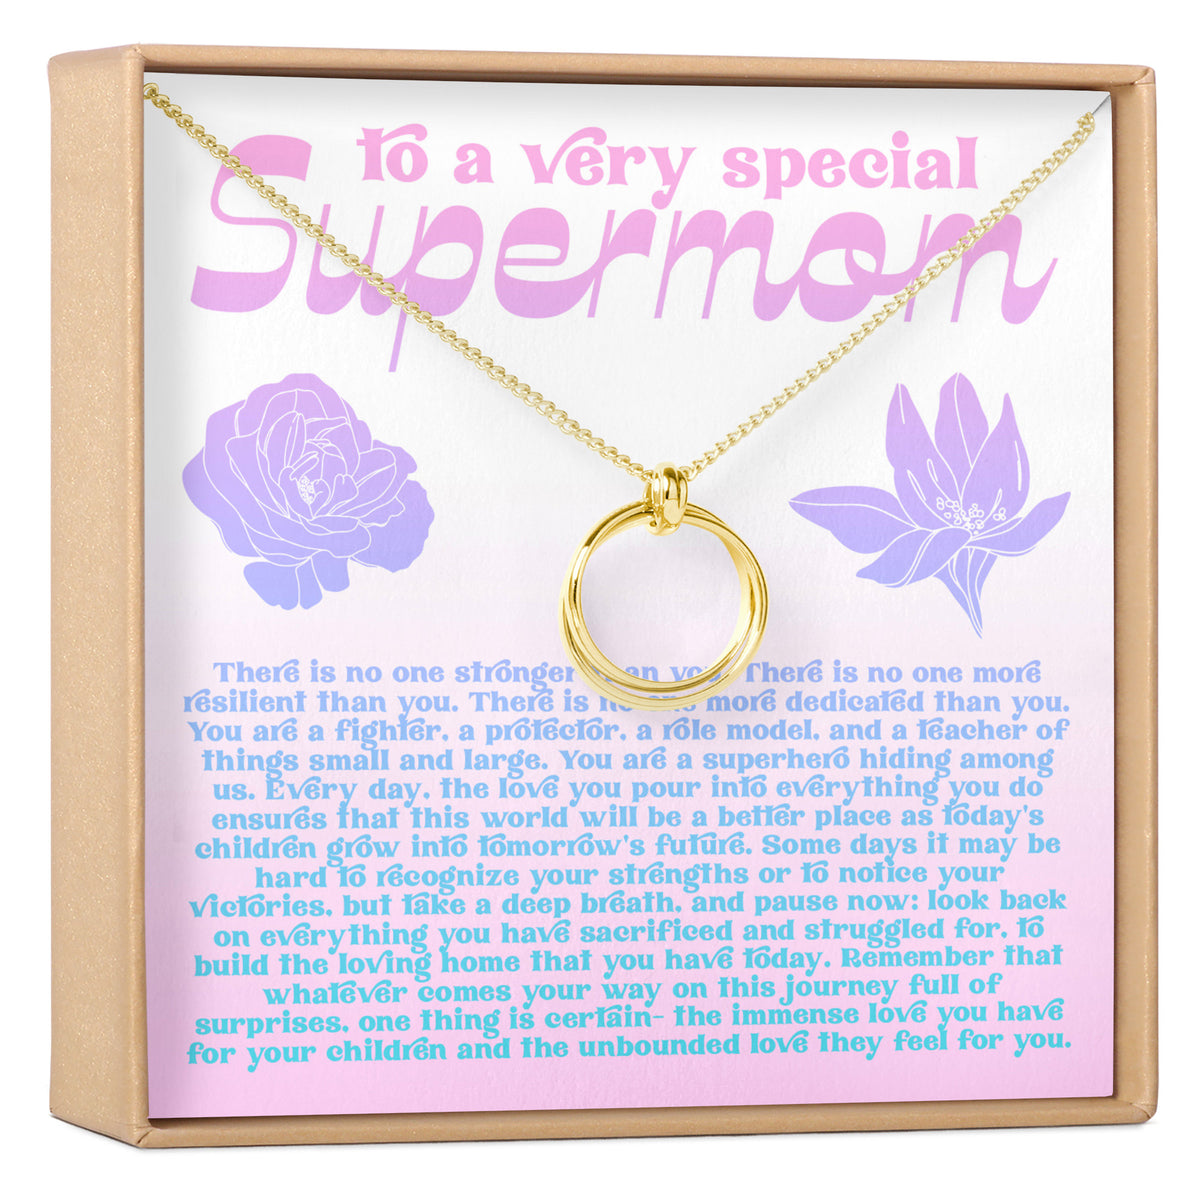 Supermom Necklace, Multiple Styles